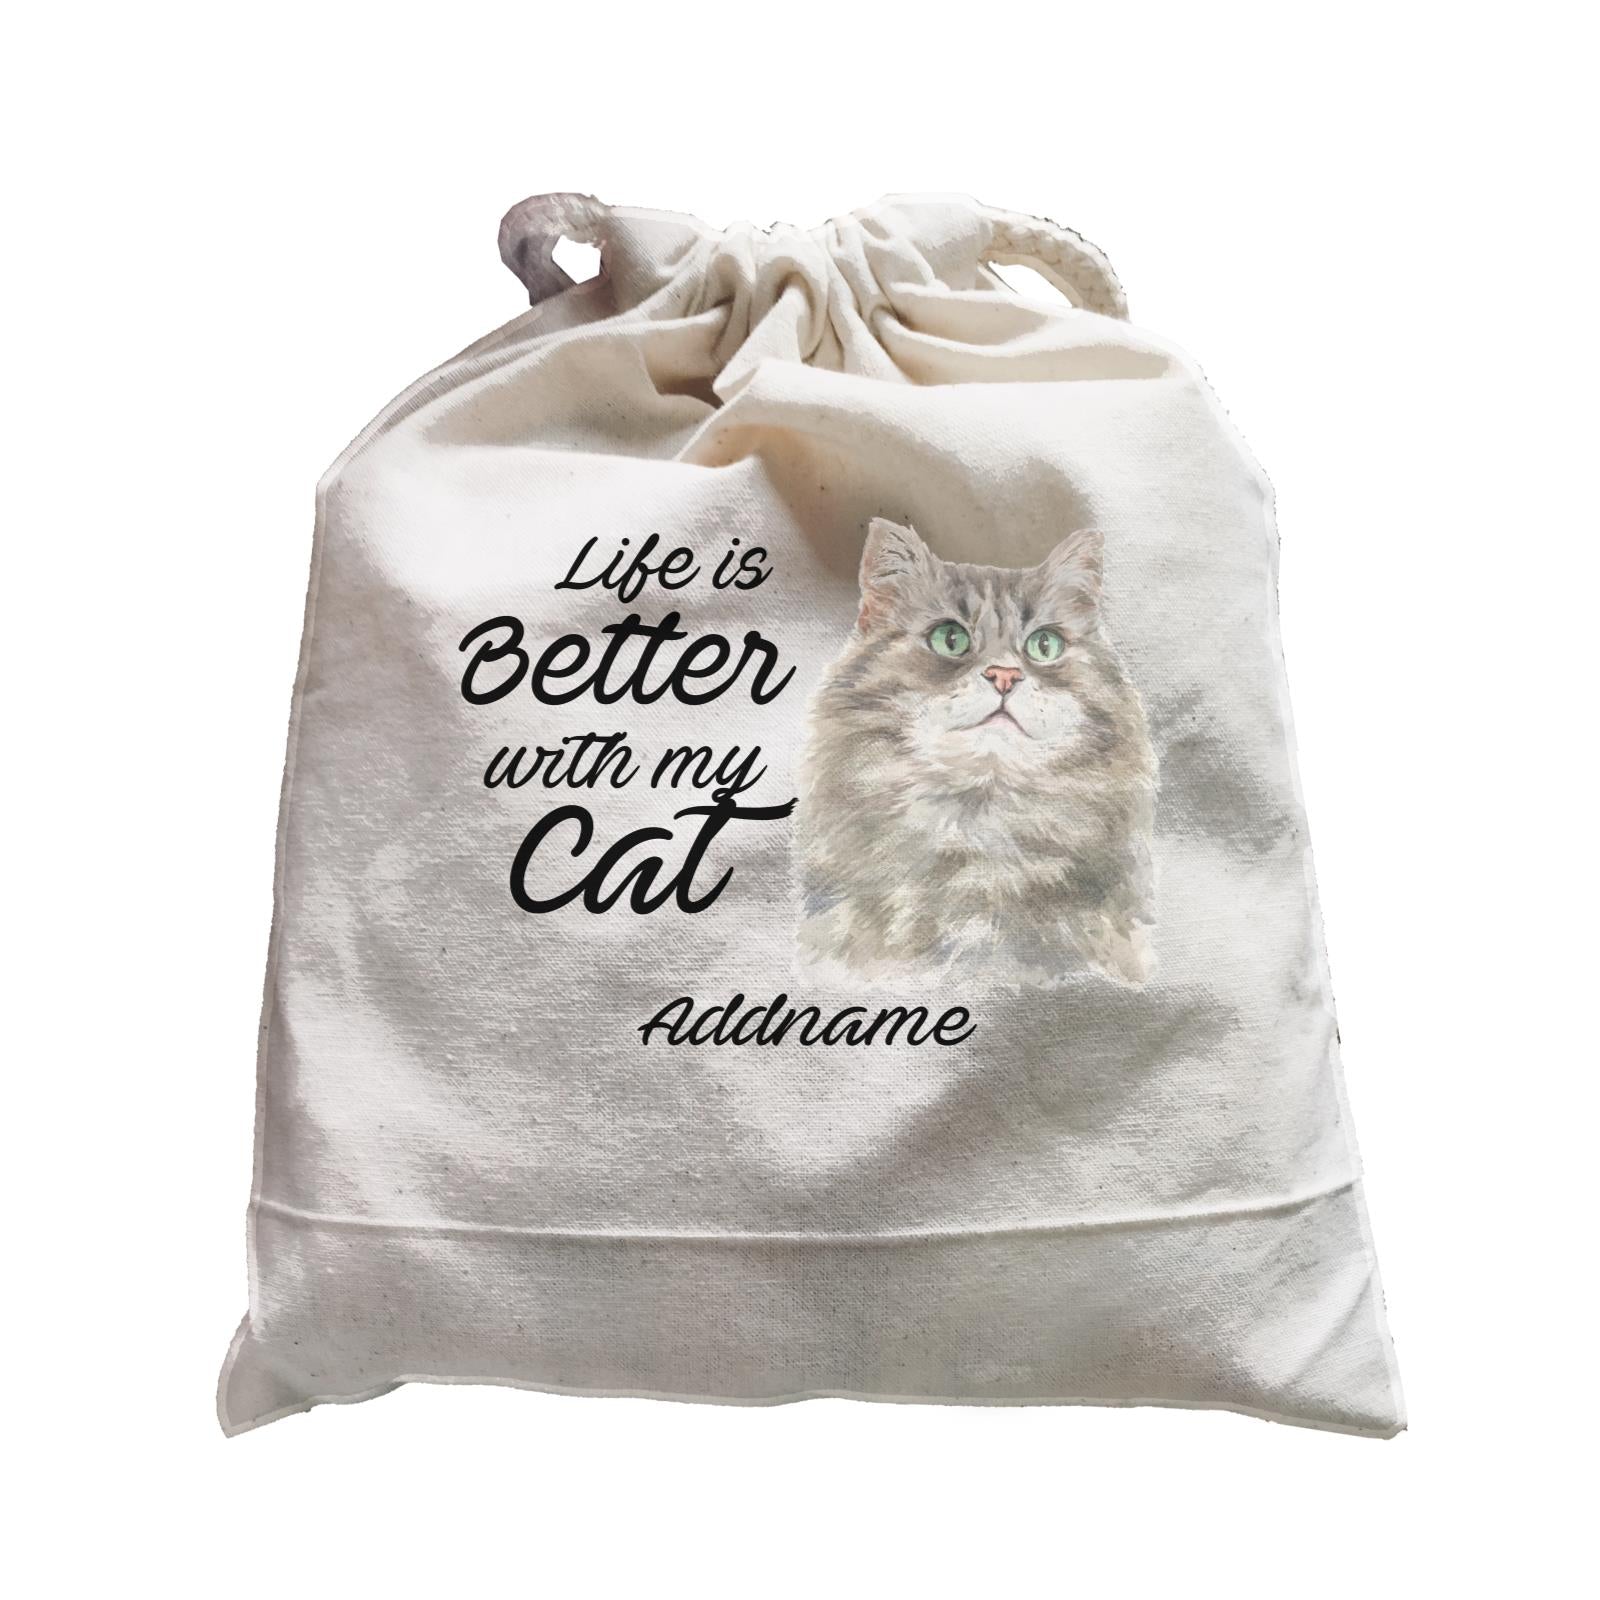 Watercolor Life is Better With My Cat Siberian Cat Grey Addname Satchel